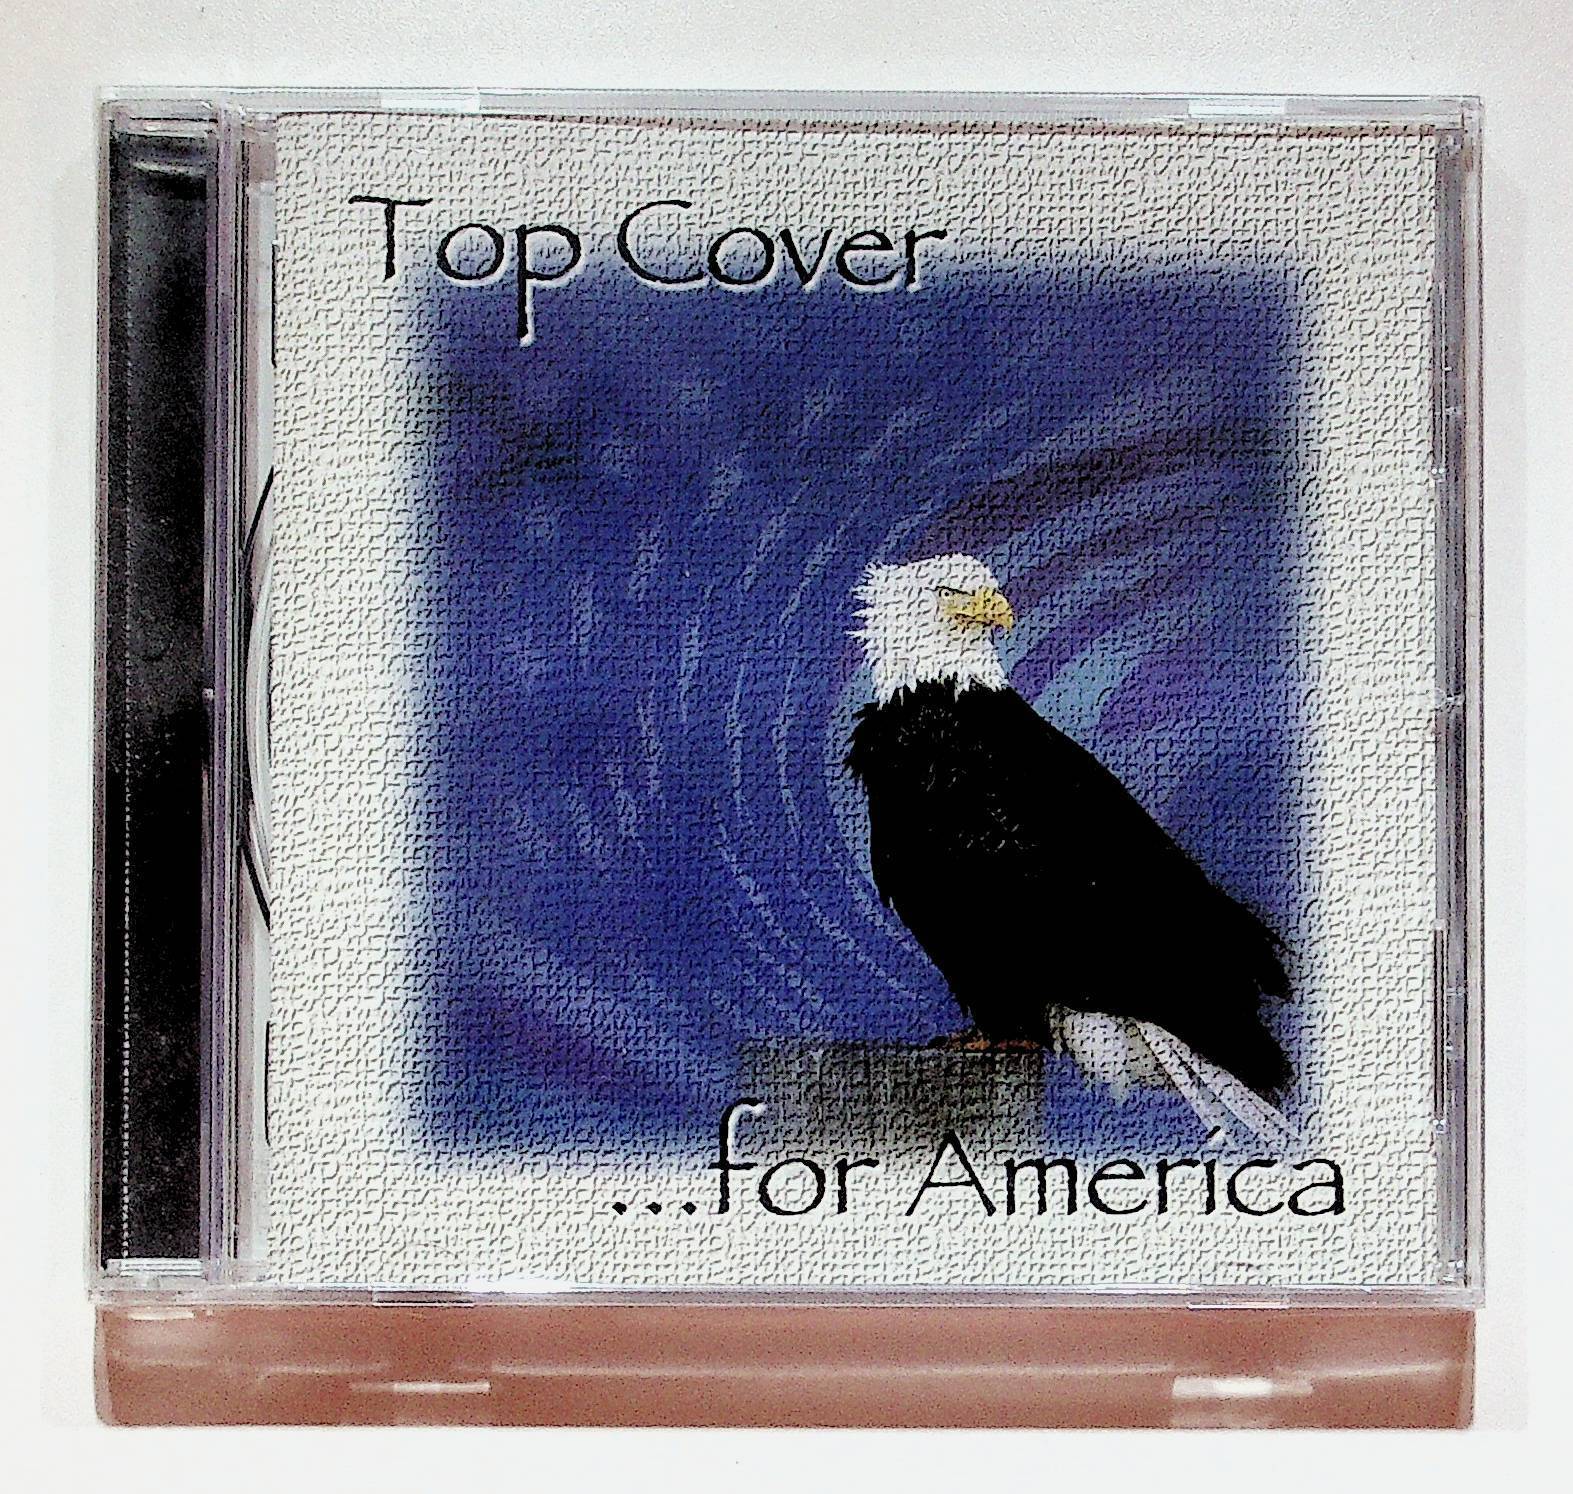 Elmendorf AFB AK US Air Force Band Pacific Top Cover For America CD NEW SEALED